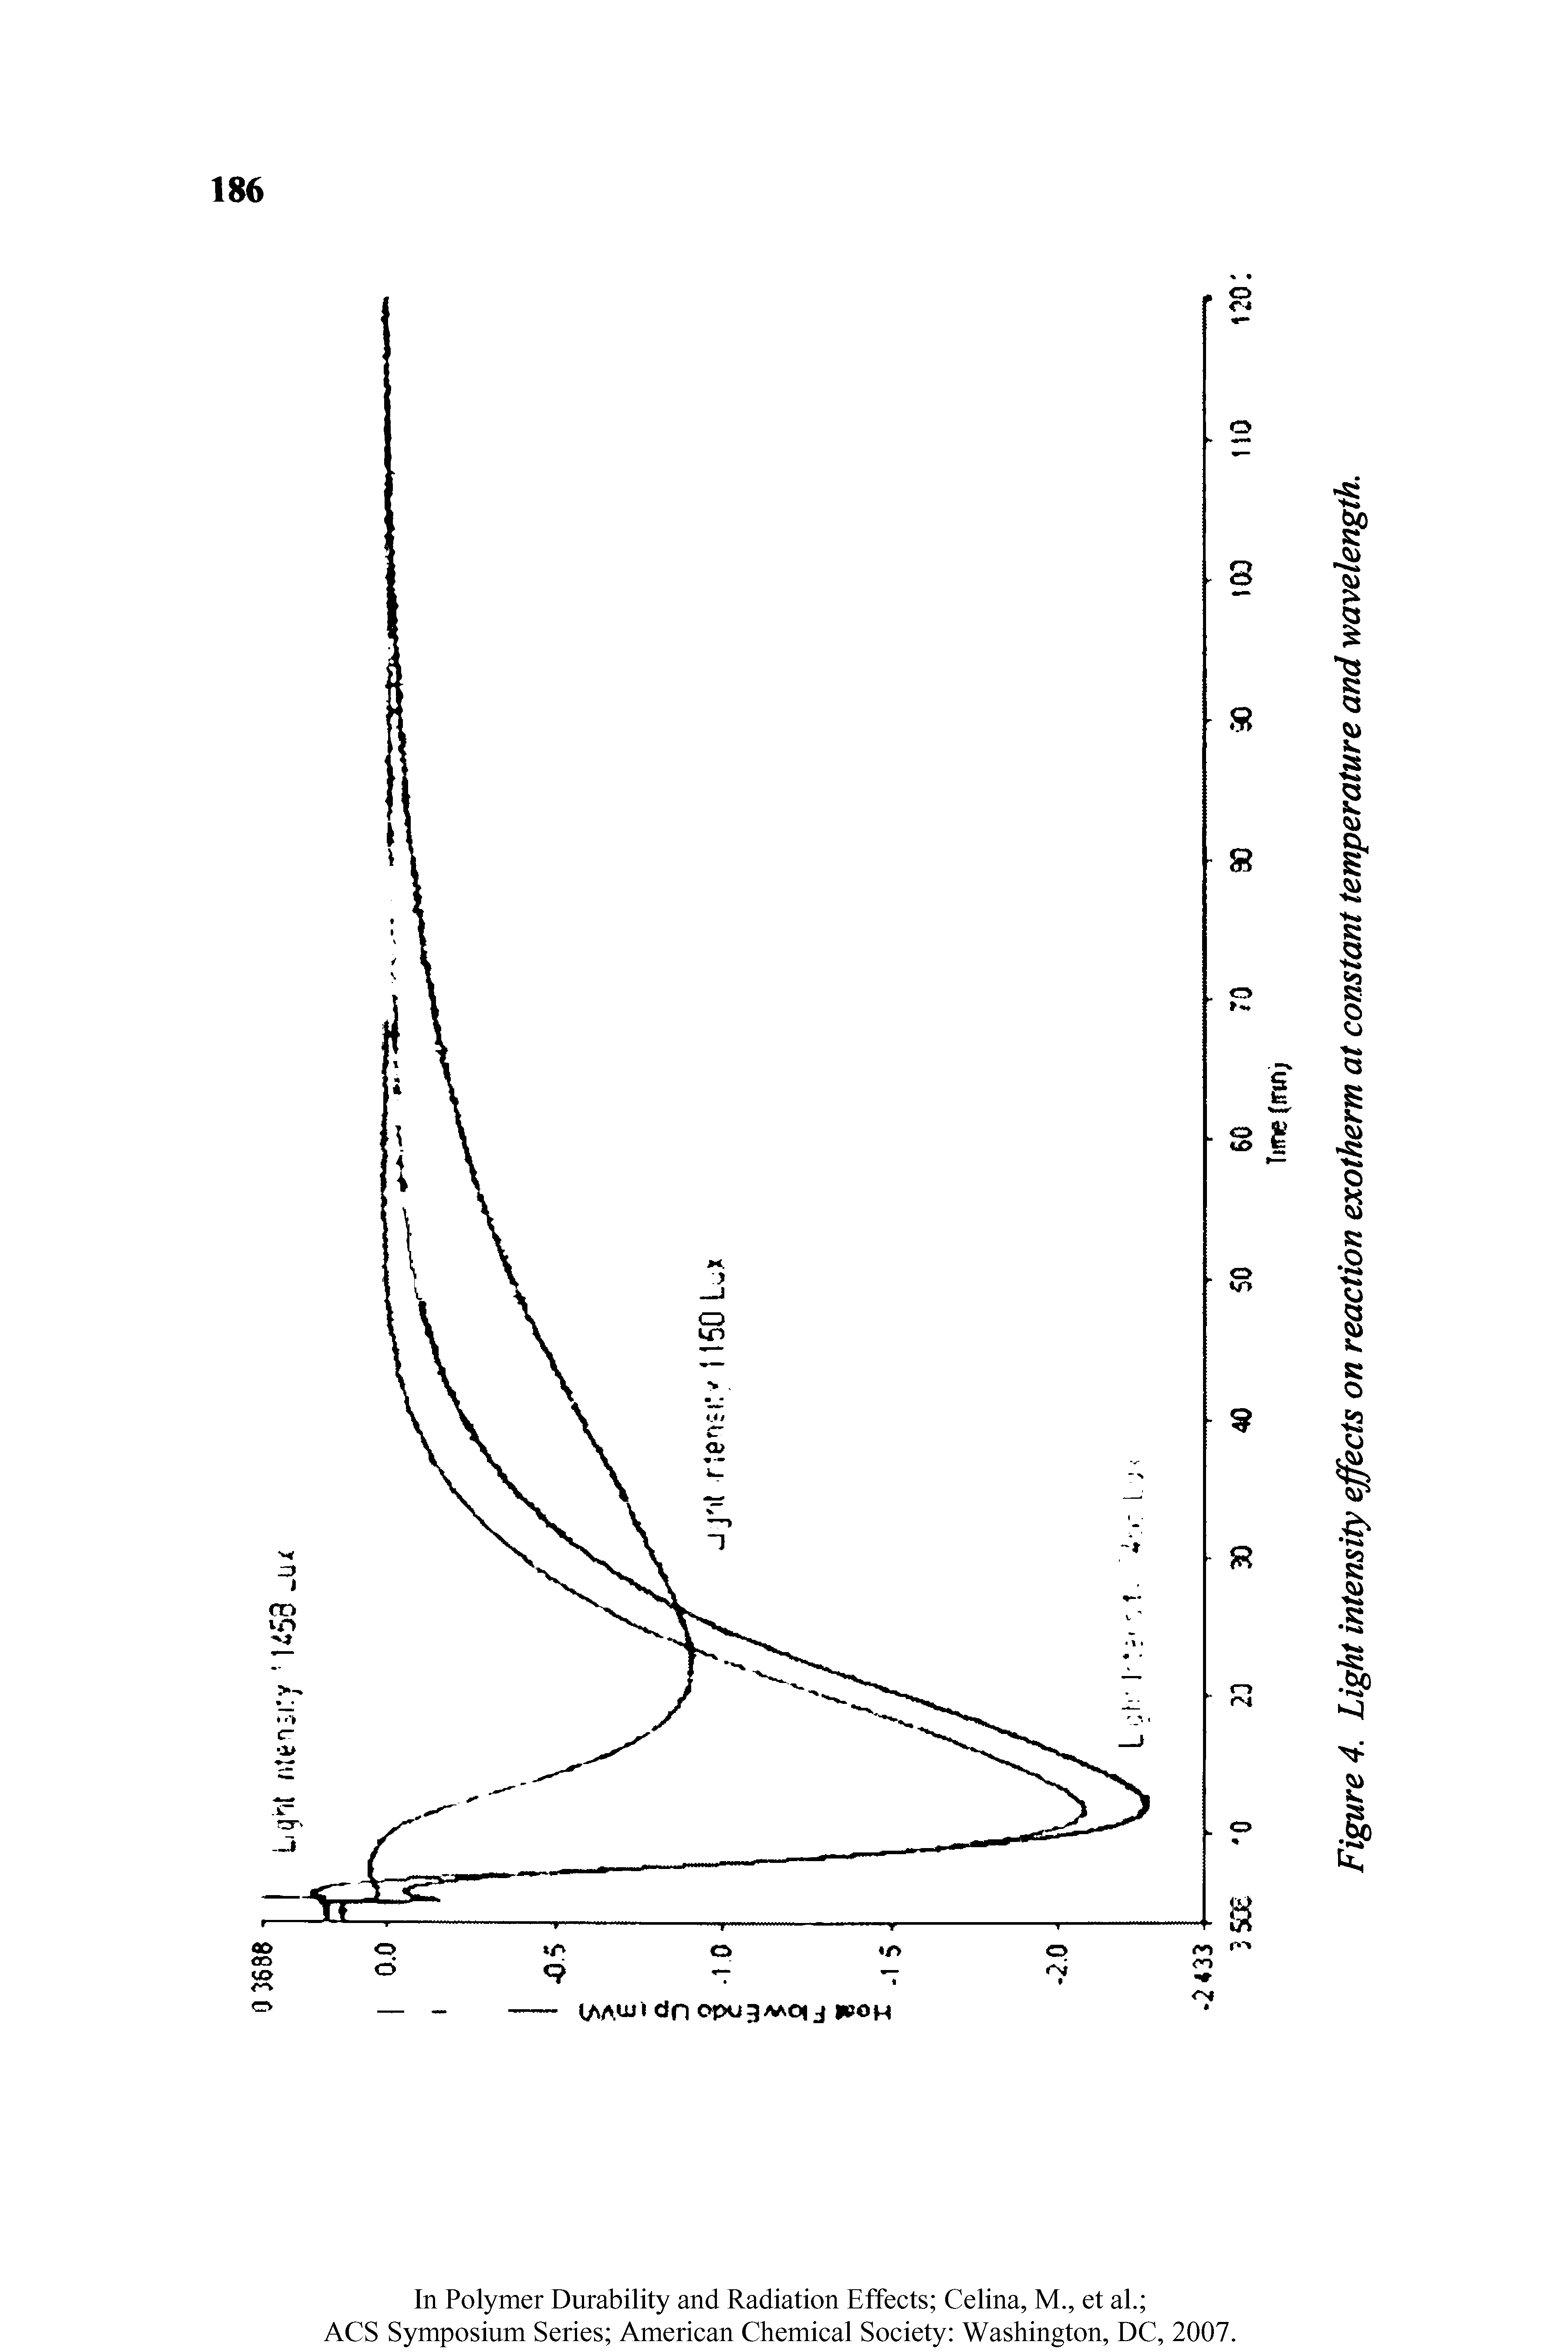 Figure 4. Light intensity effects on reaction exotherm at constant temperature and wavelength.